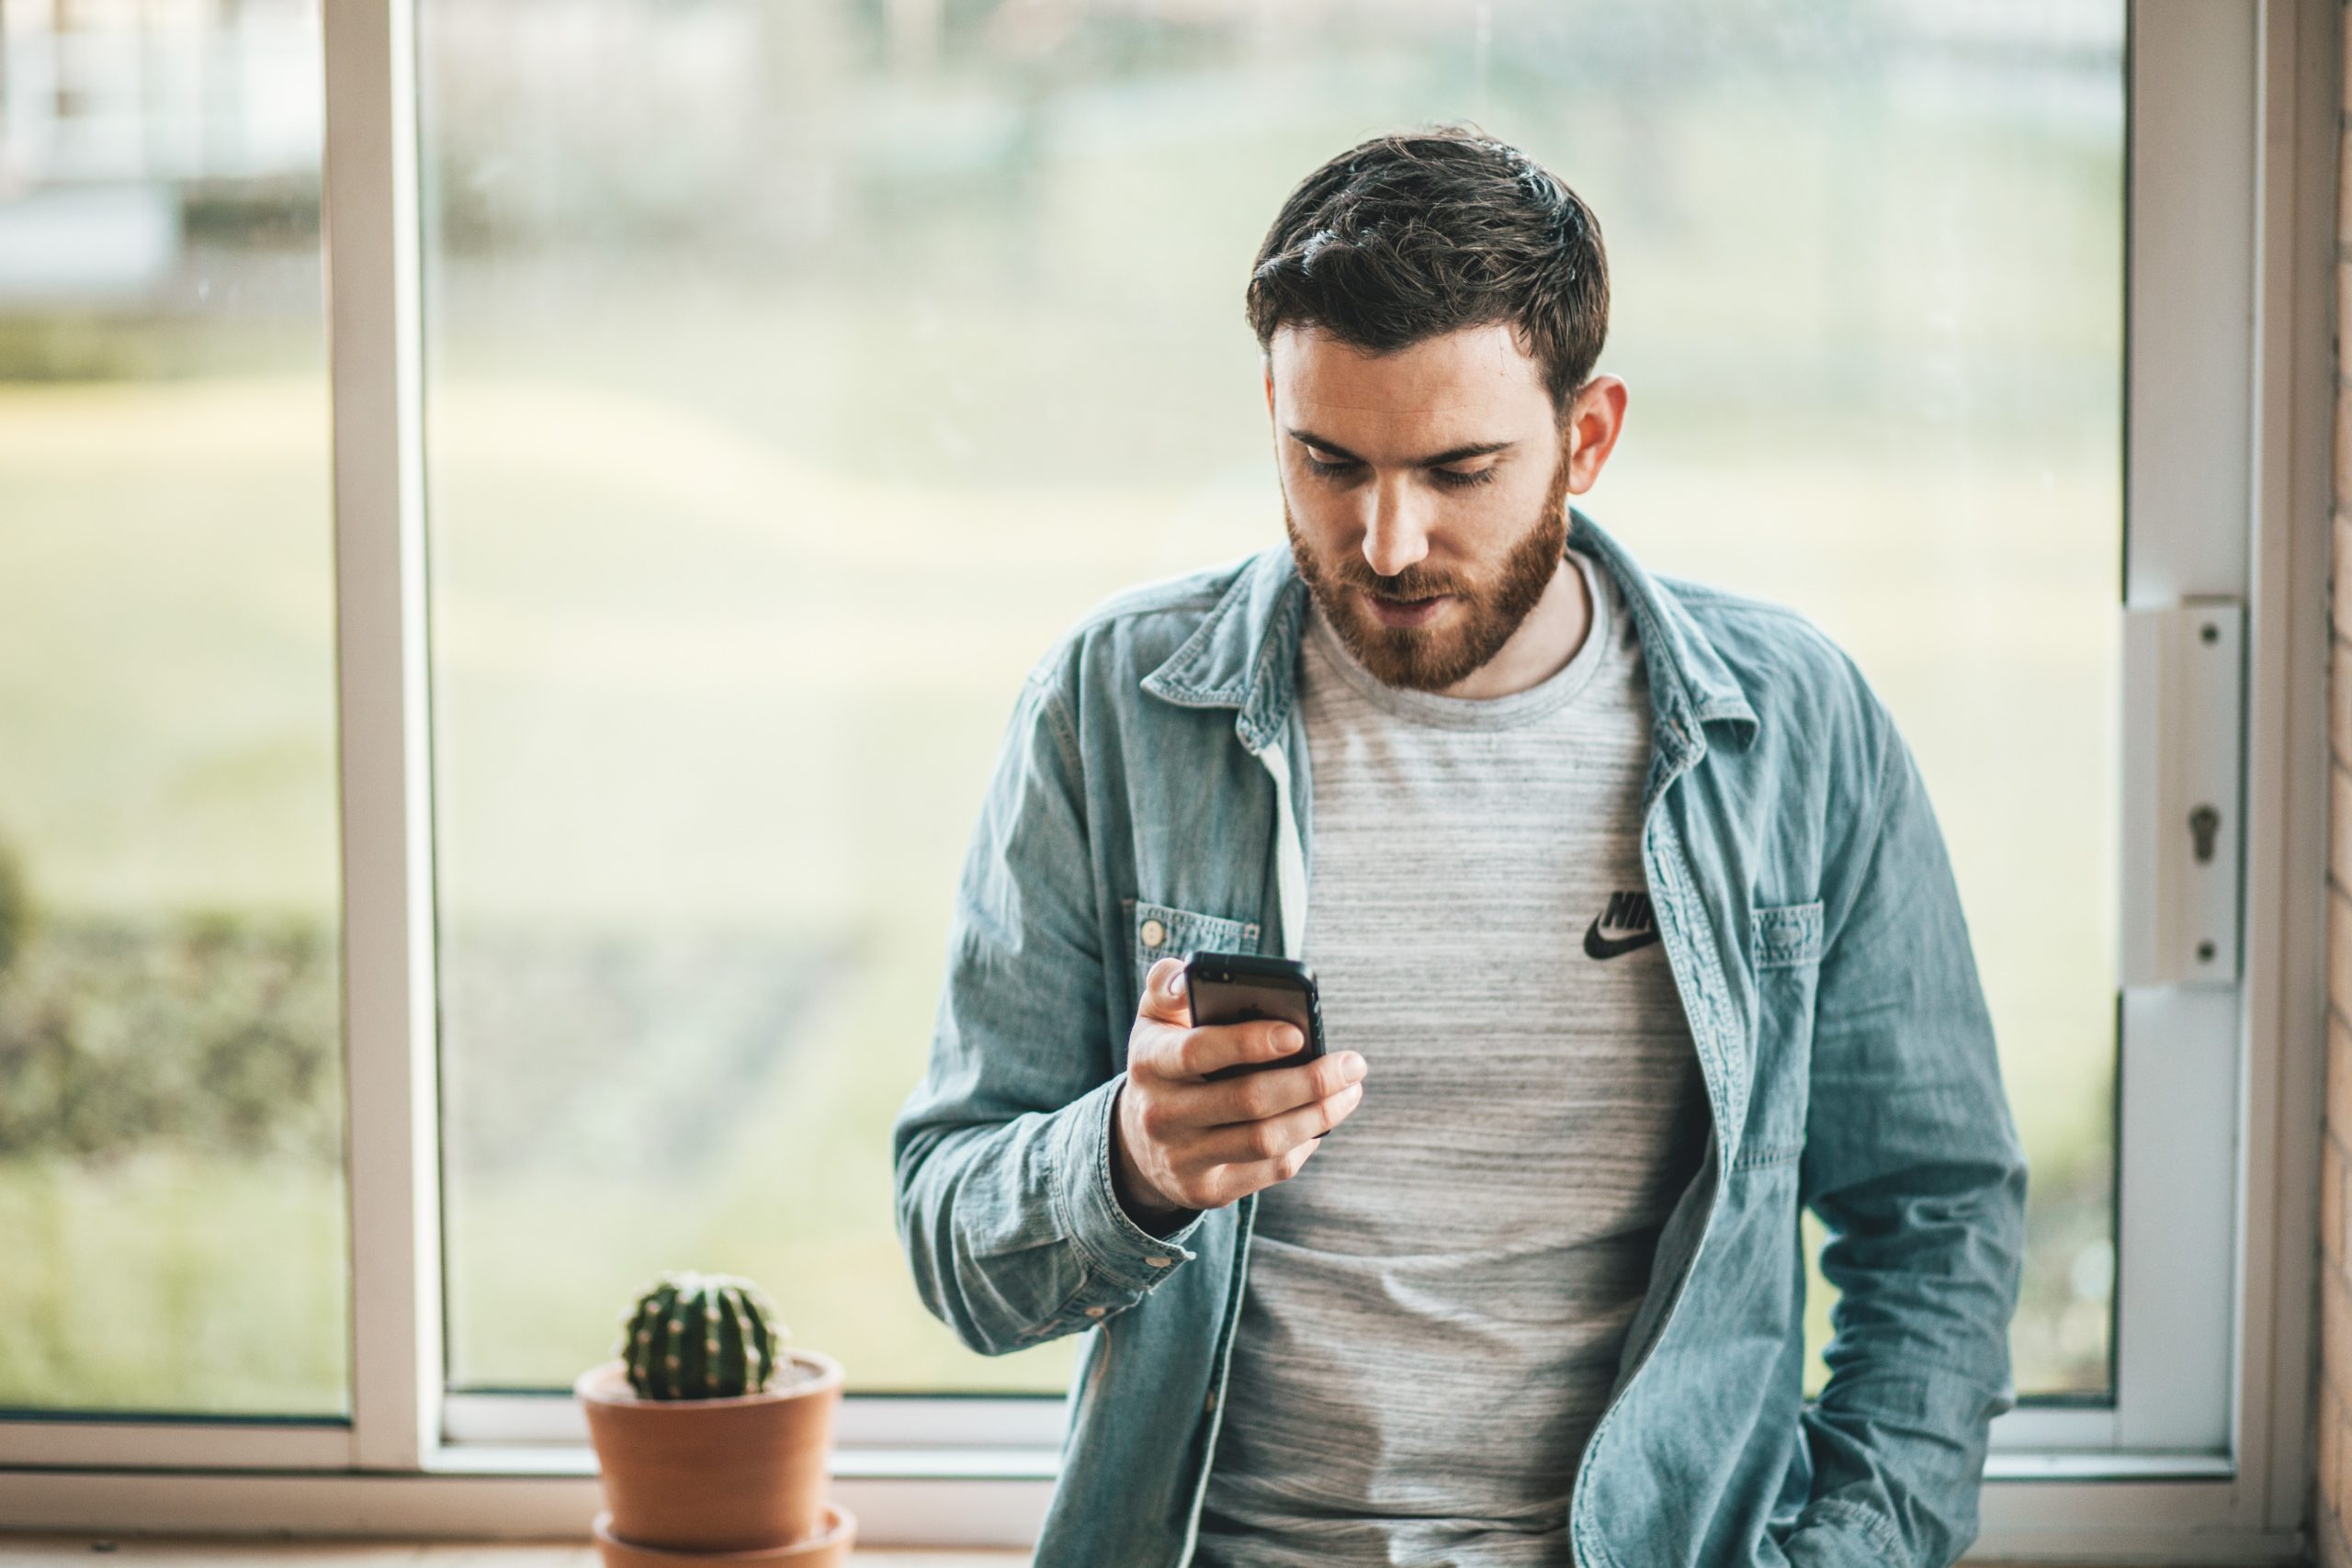 Man staring at his smartphone dealing with digital addiction